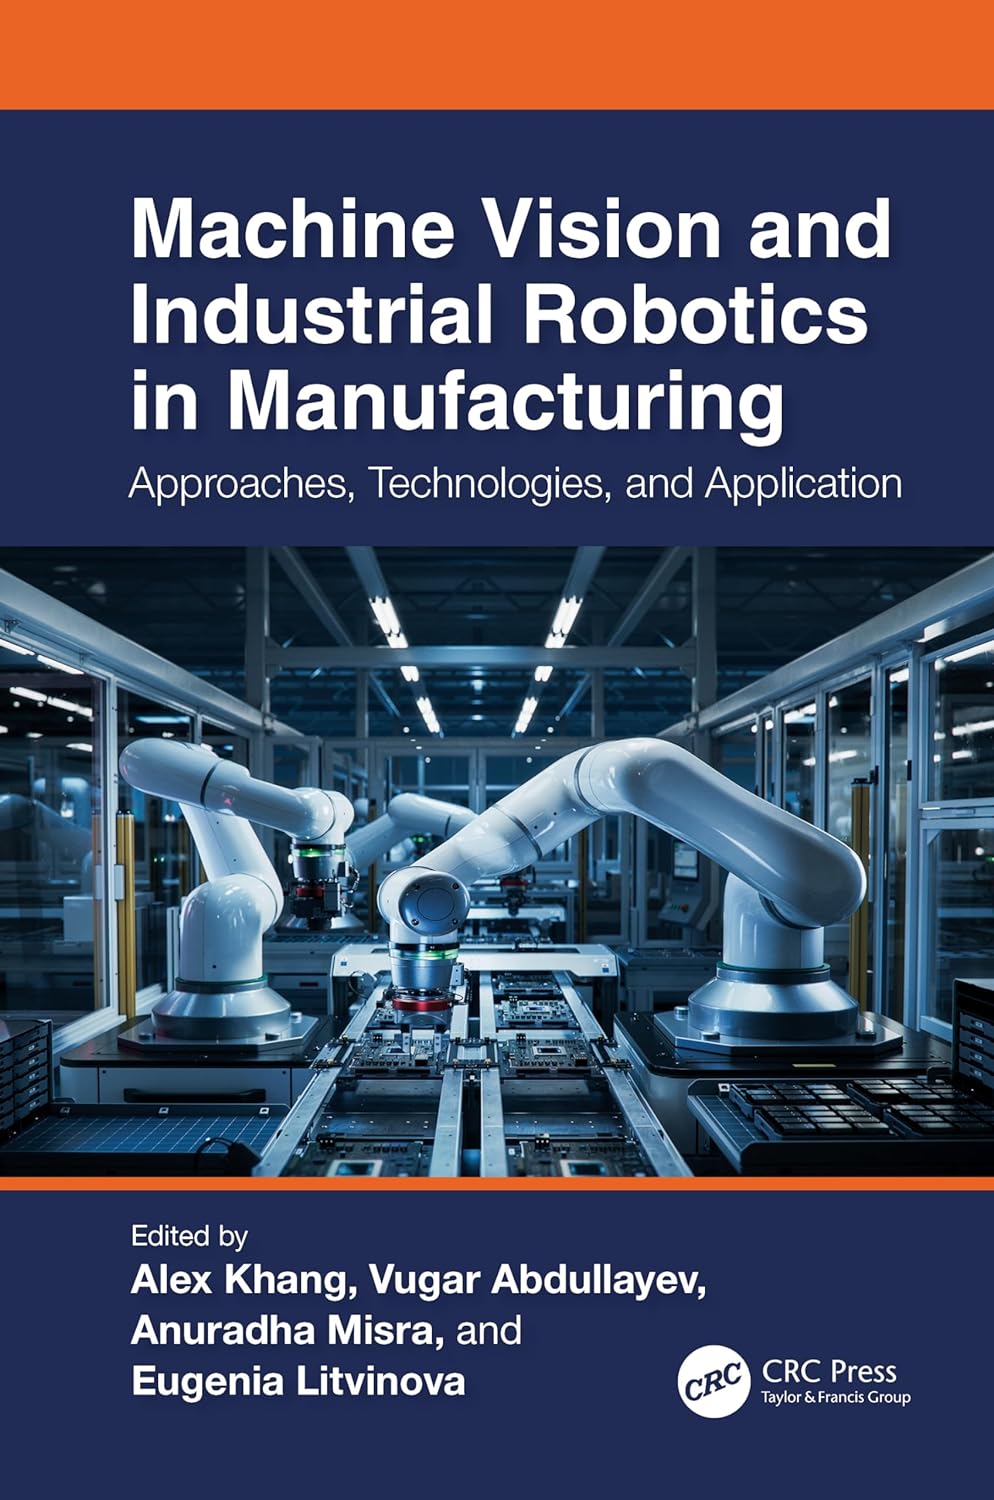 Machine Vision and Industrial Robotics in Manufacturing: Approaches, Technologies, and Applications